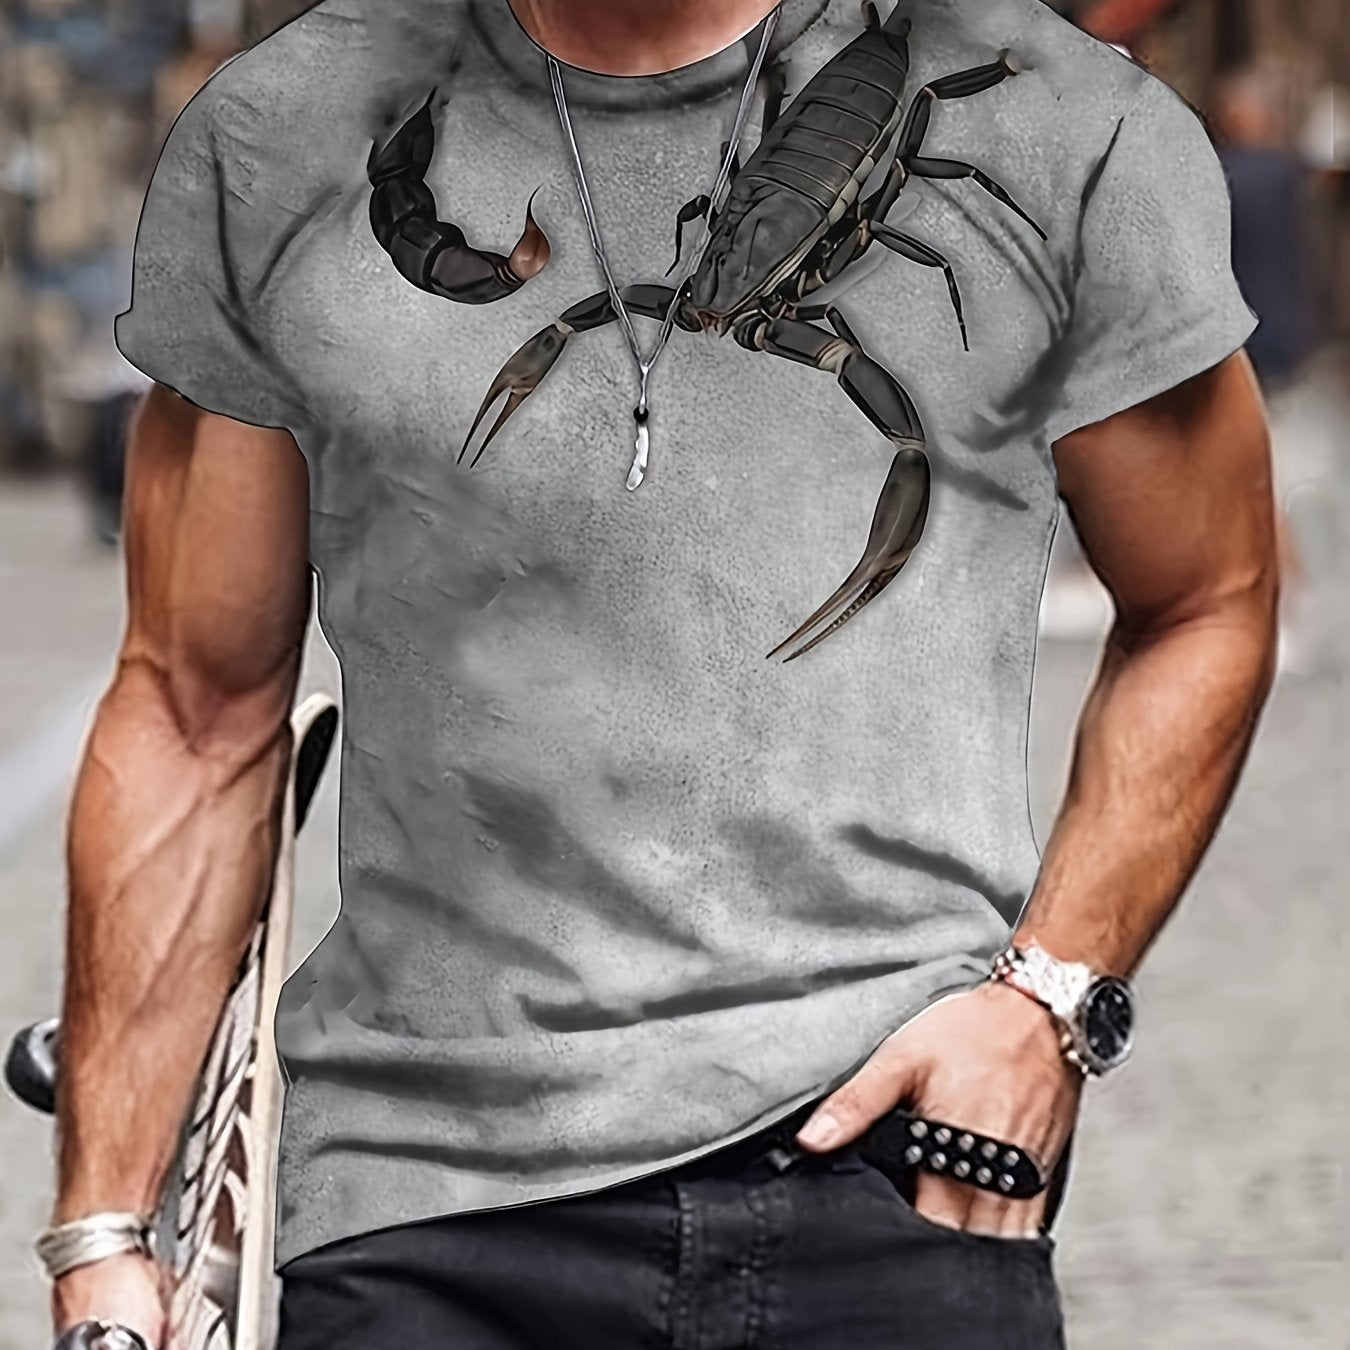 3D Scorpion Print, Men's Graphic Design Crew Neck Novel T-shirt, Casual Comfy Tees Tshirts For Summer, Men's Clothing Tops For Daily Vacation Resorts